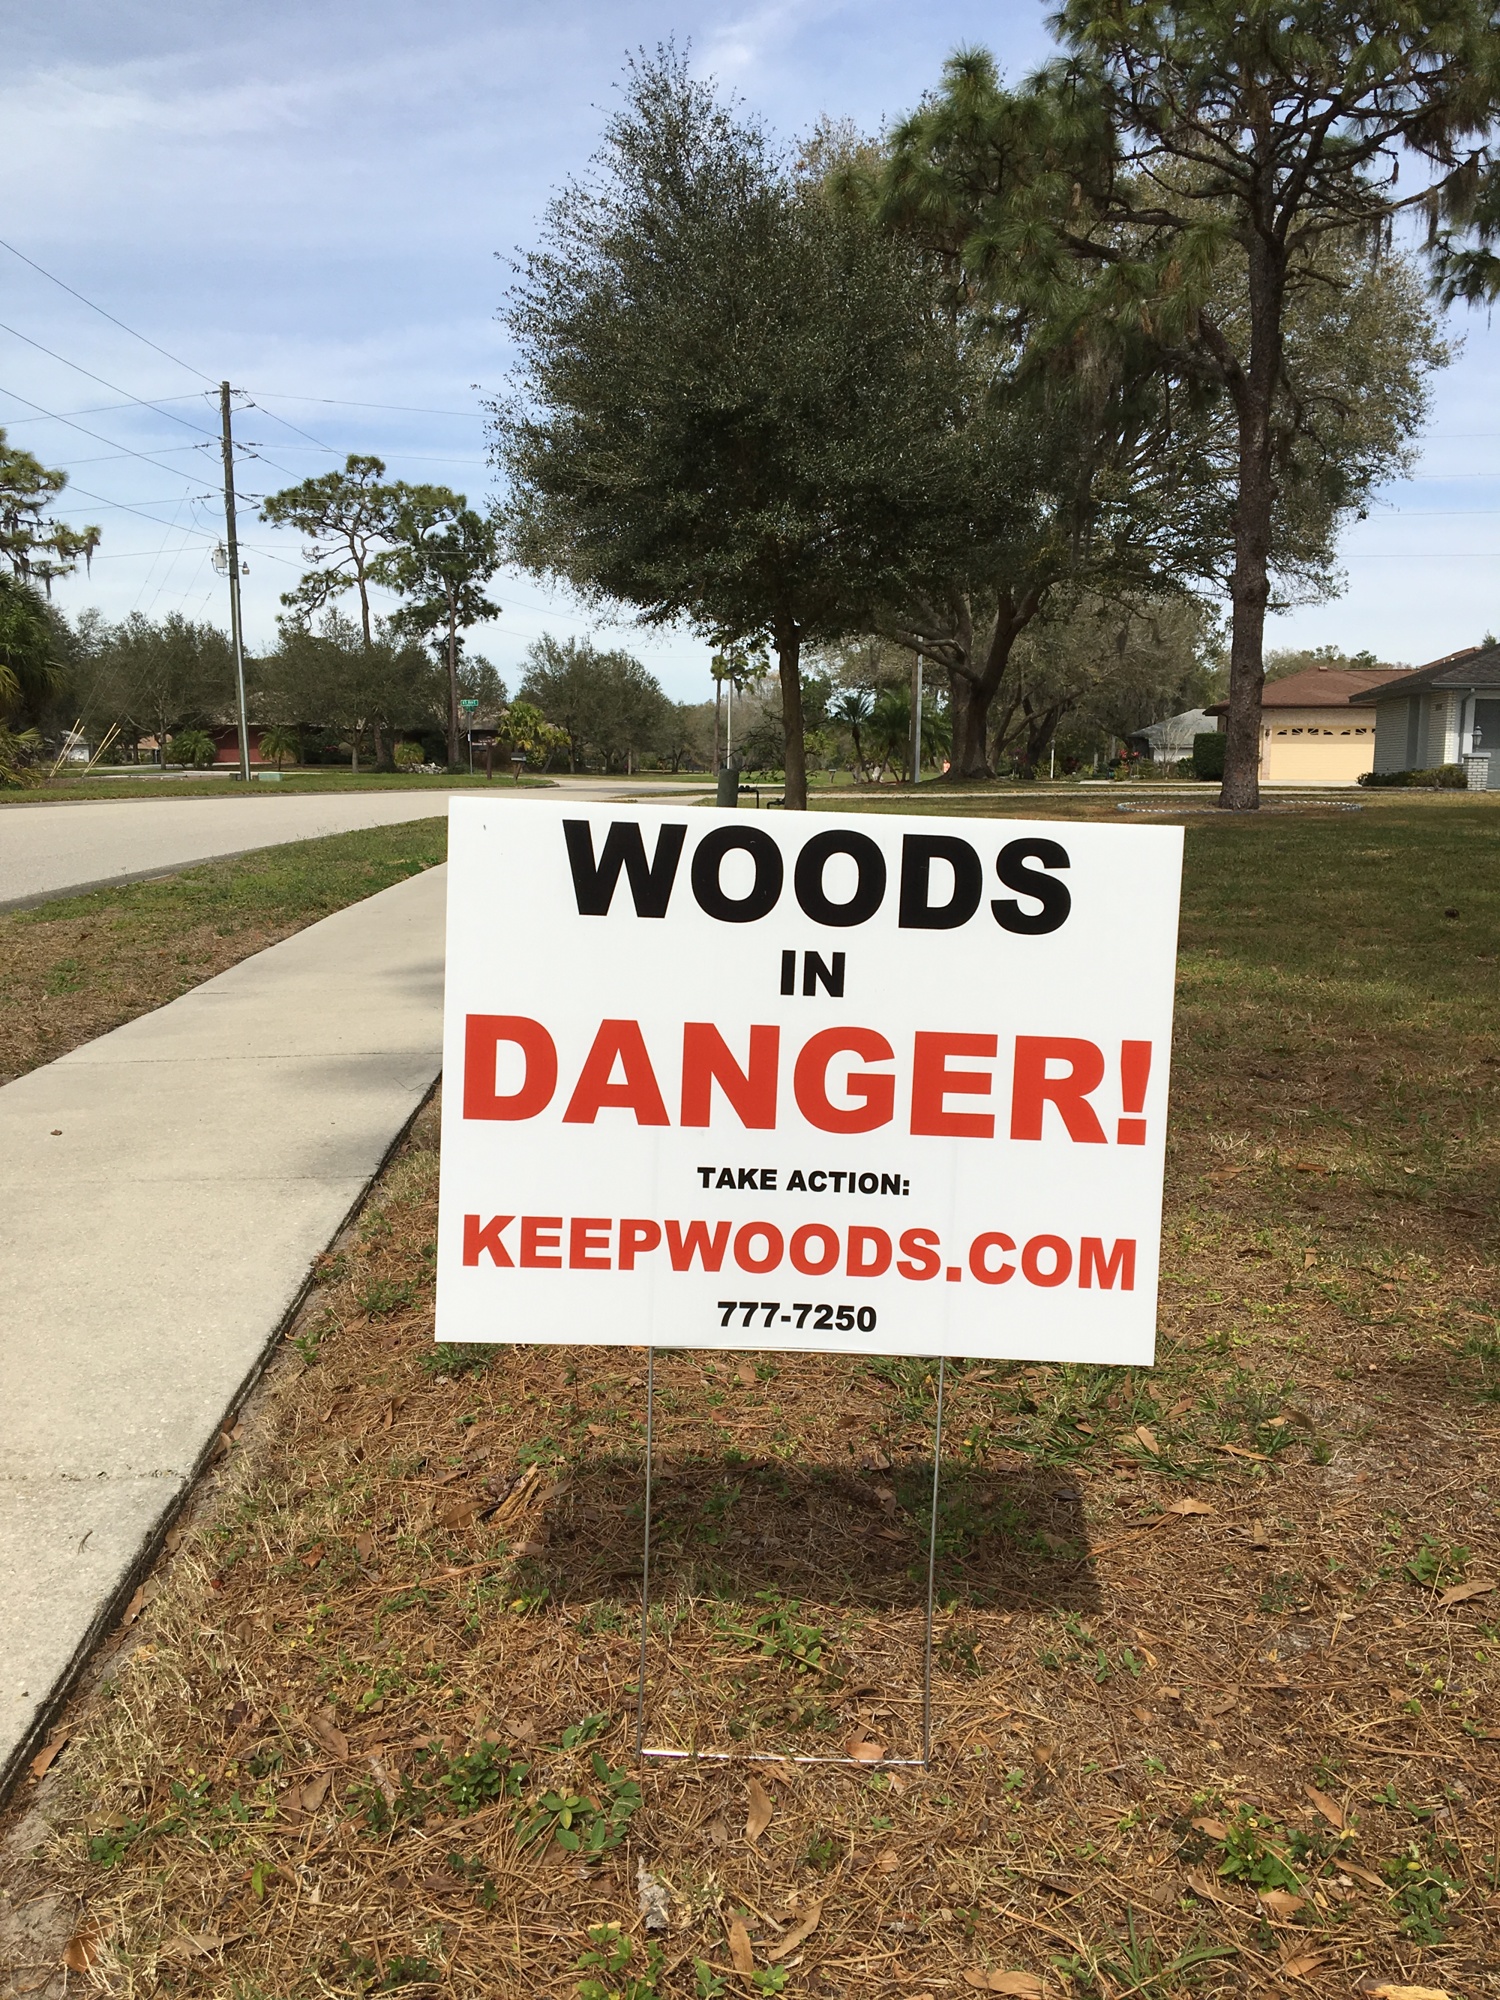 Friends of Keep Woods put out almost 500 of these signs at the beginning of their campaign.